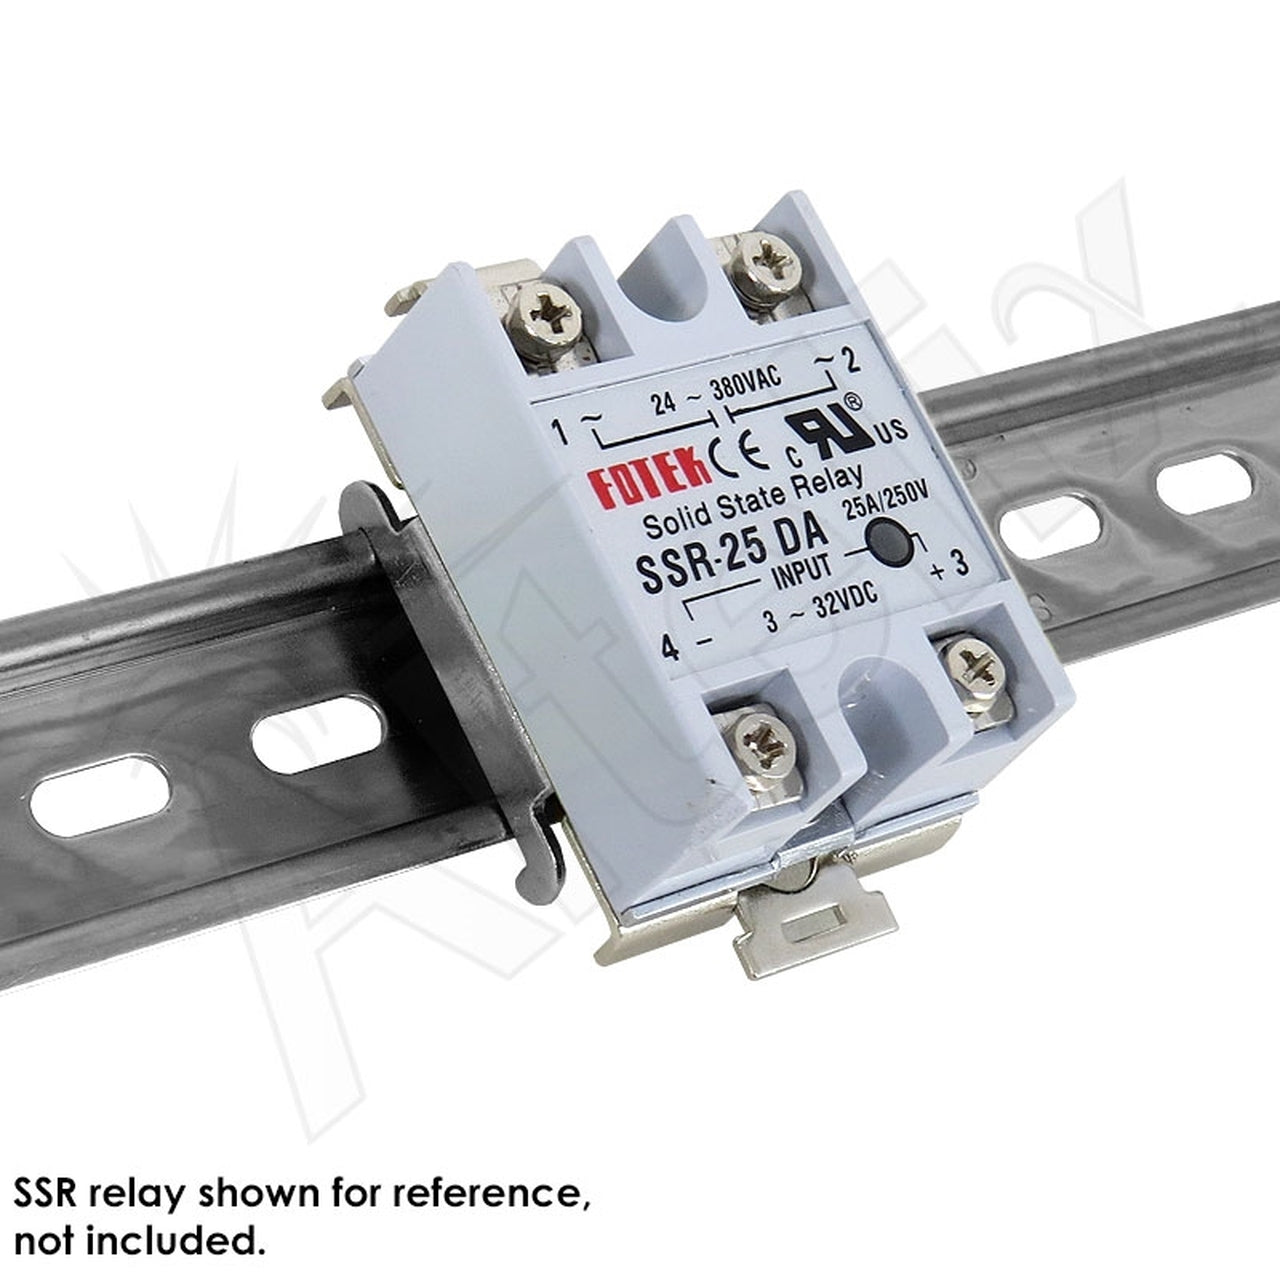 35mm DIN Rail Mounting Clip for SSR Type Relays - 0